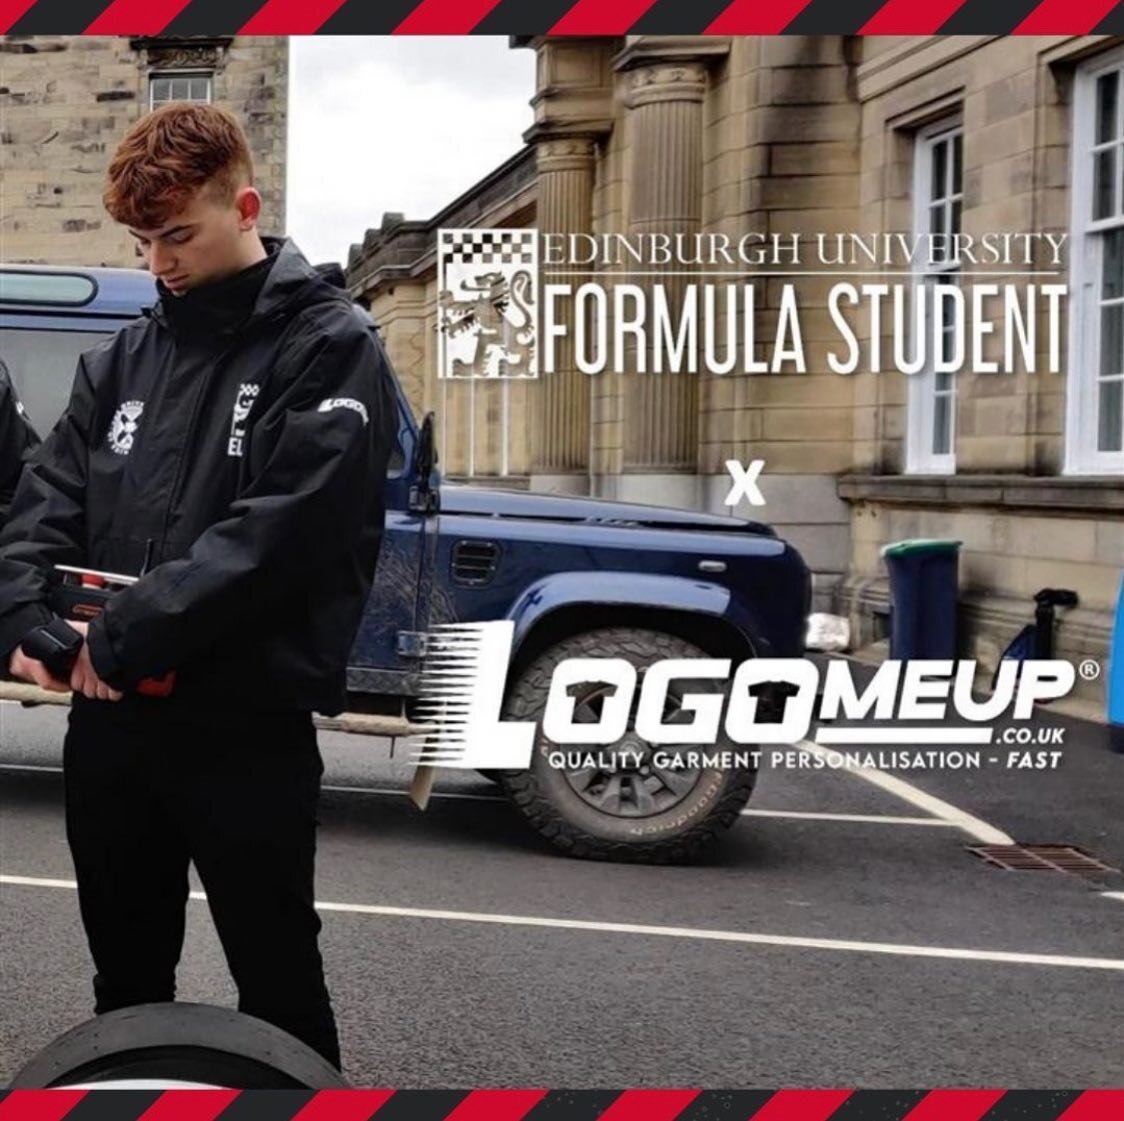 Welcome to the team, LogoMeUp!
Whether you&rsquo;ve seen us at Silverstone, Goodwood or in and around Edinburgh, you&rsquo;re likely to have spotted some of the stylish EUFS merchandise we wear. The jackets, polo shirts and fleeces are all courtesy o